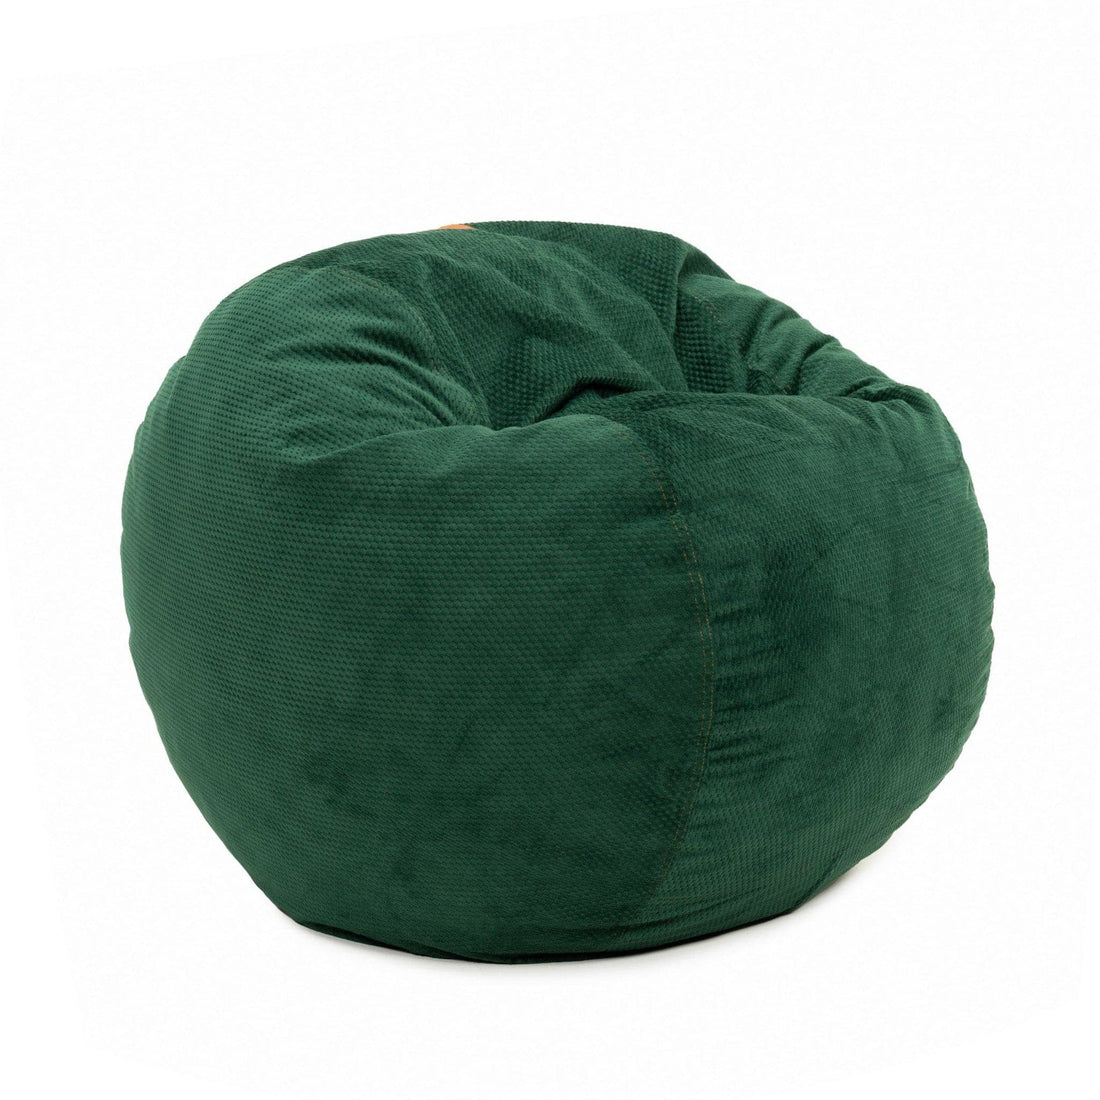 Huge Giant Bean Bag Chair Chenille CordaRoy's Convertible, 56% OFF